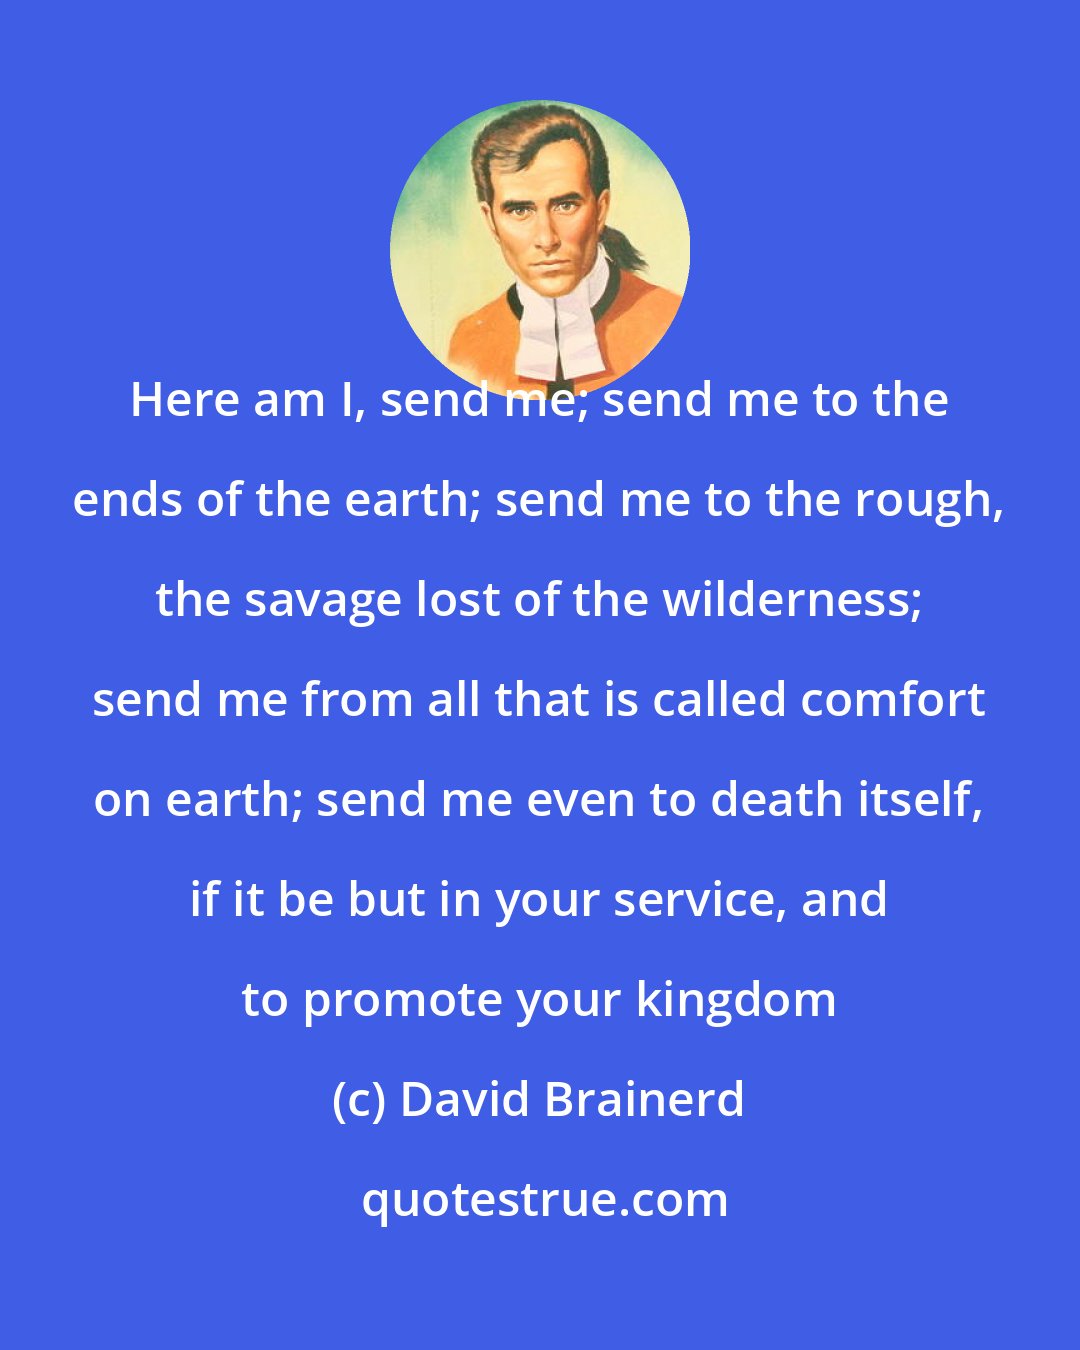 David Brainerd: Here am I, send me; send me to the ends of the earth; send me to the rough, the savage lost of the wilderness; send me from all that is called comfort on earth; send me even to death itself, if it be but in your service, and to promote your kingdom